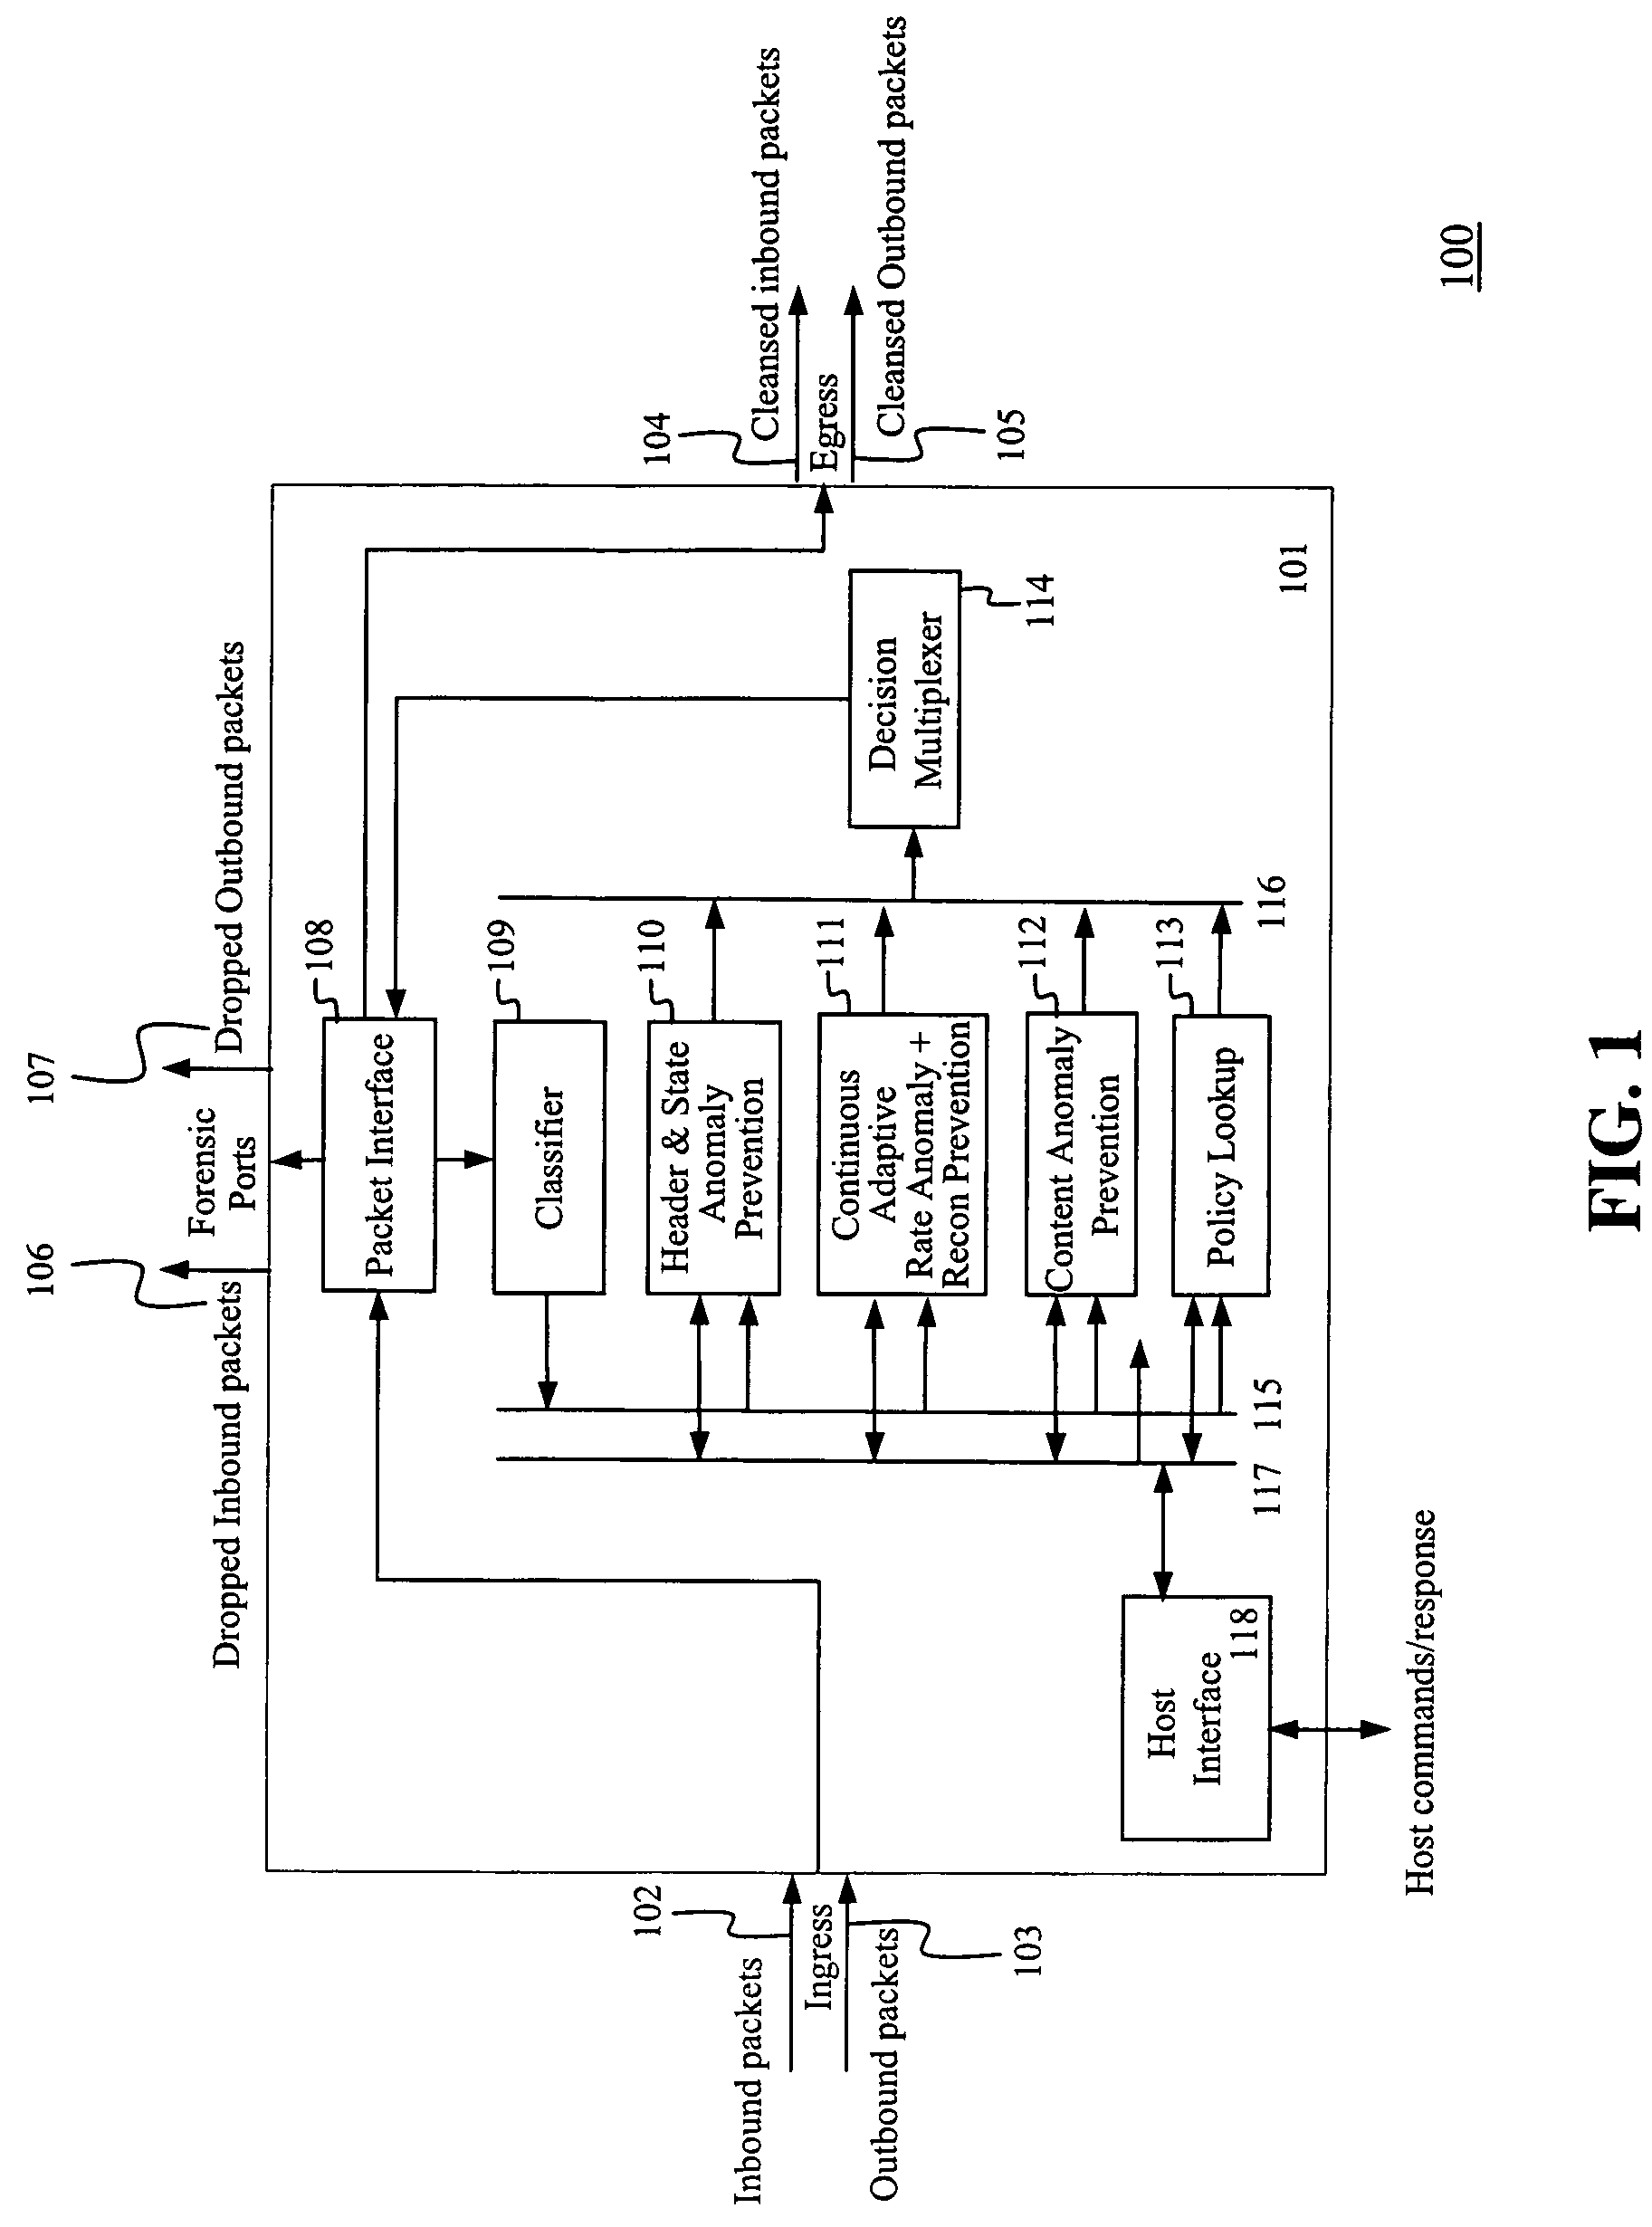 System and method for integrated header, state, rate and content anomaly prevention for domain name service